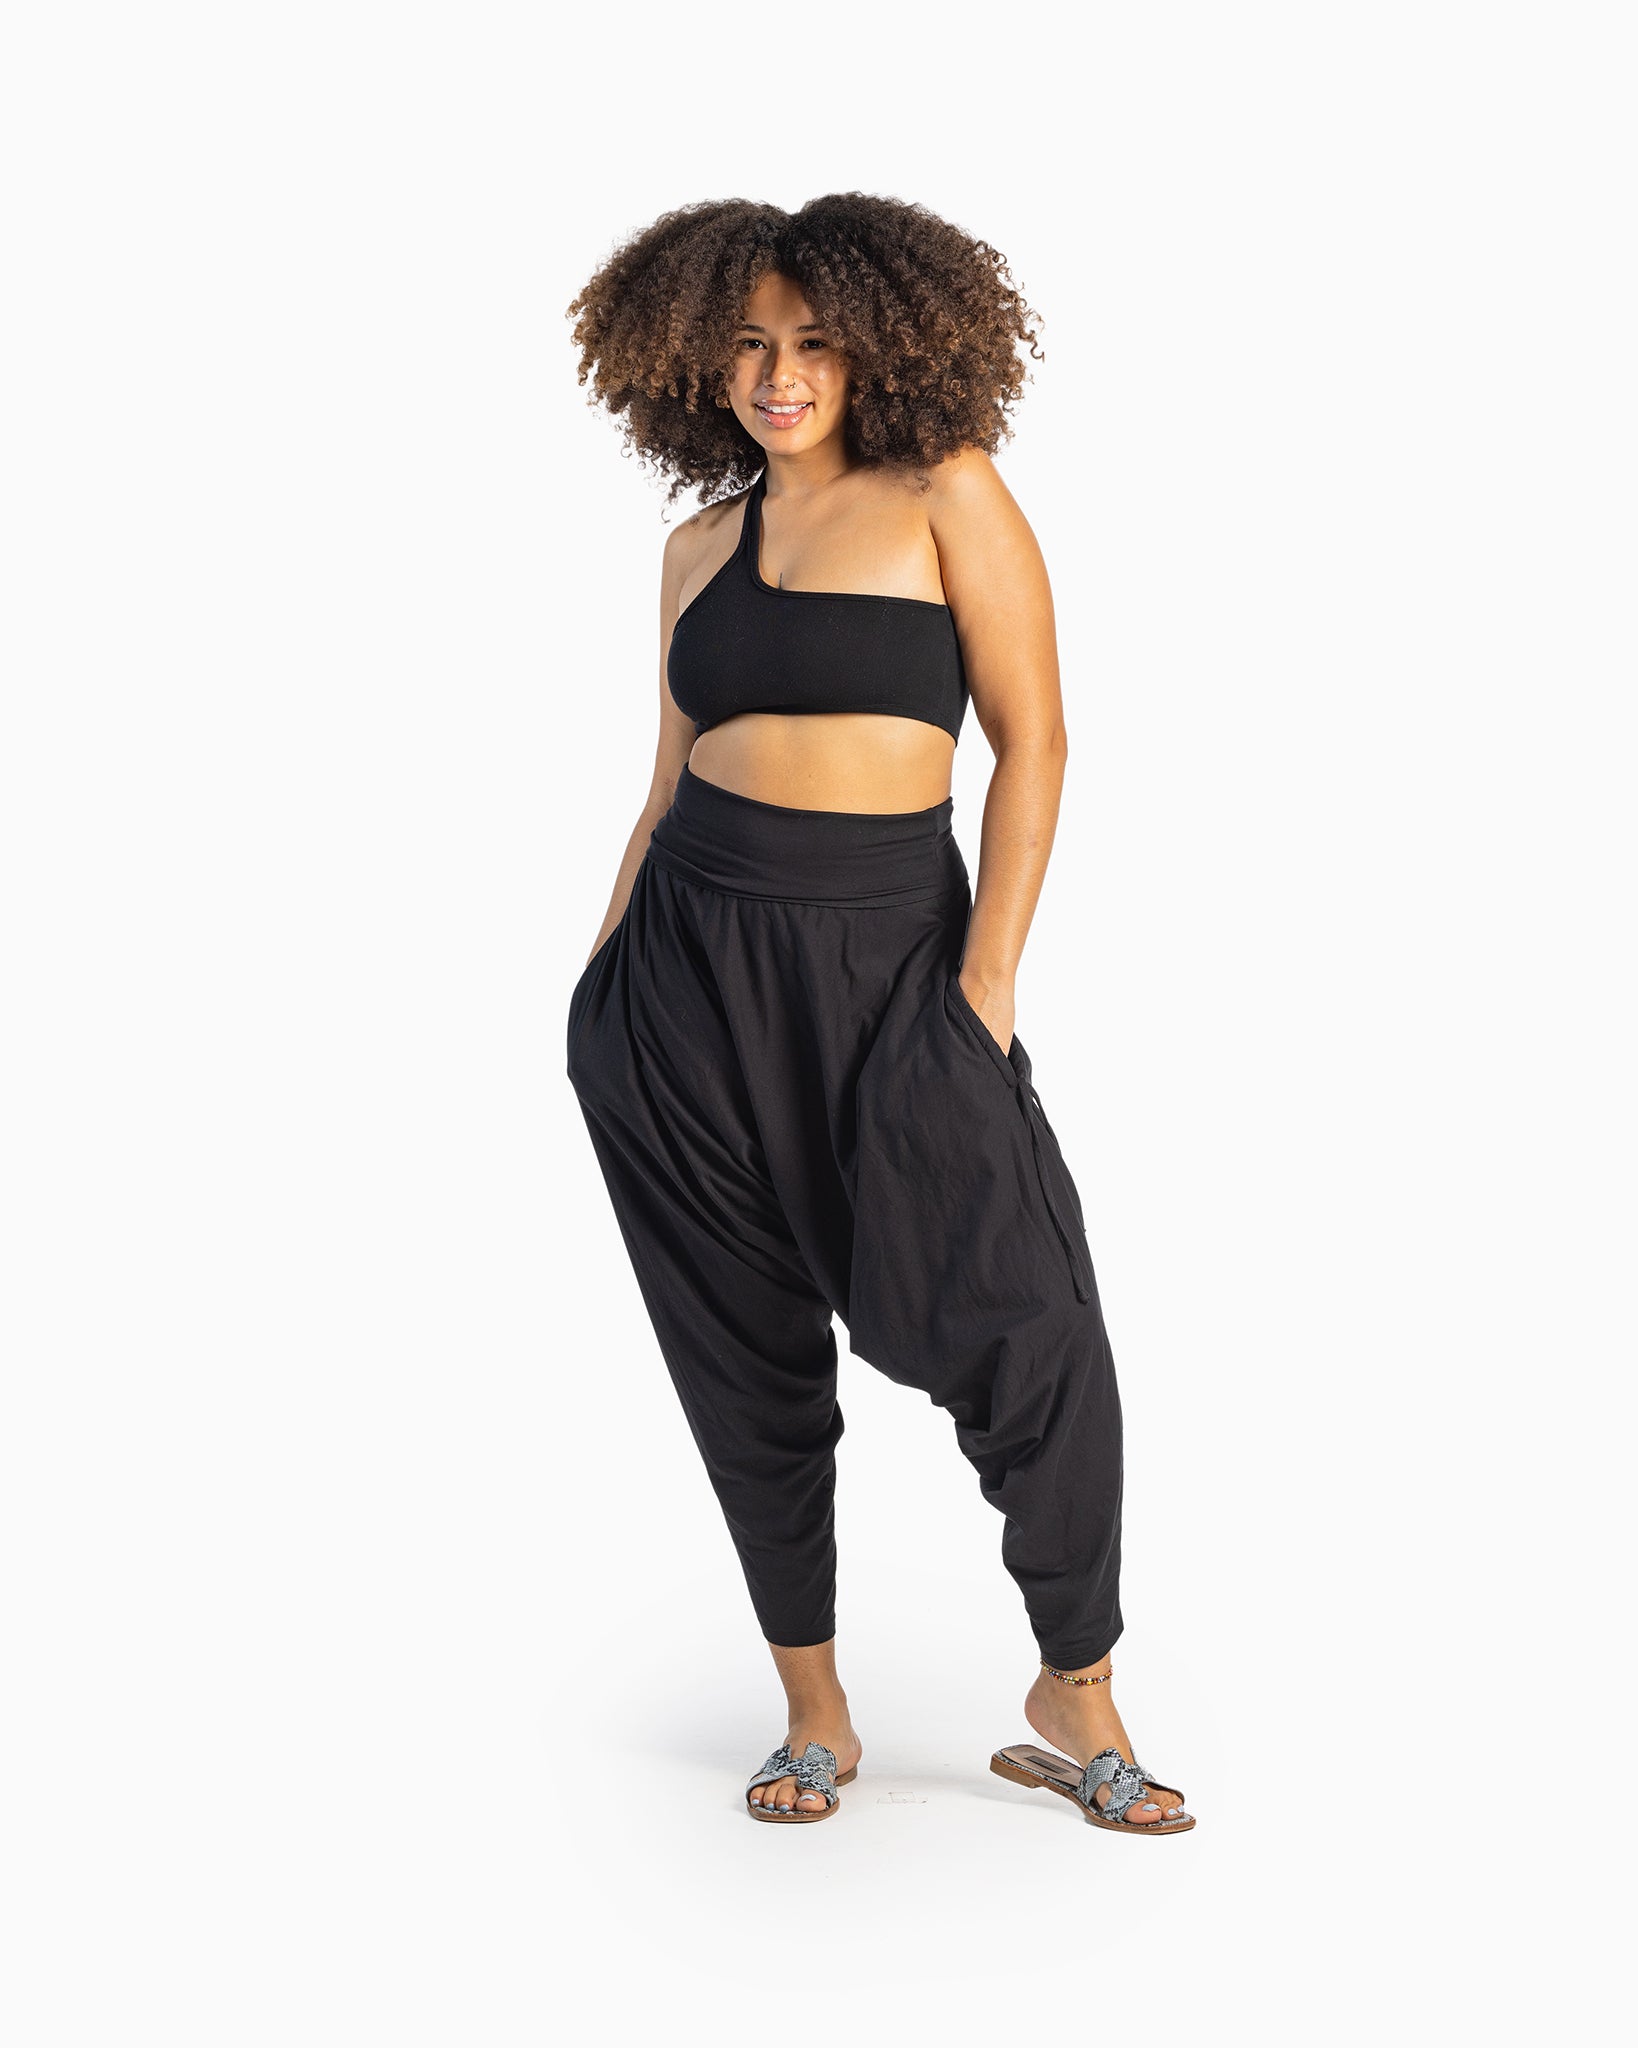 Buddha Pants - Don't get stuck in leggings all summer!☀️ Our organic bamboo  cotton San Fran Pant is lightweight, breathable & styles with versatility  🤙 Available in — black, coral